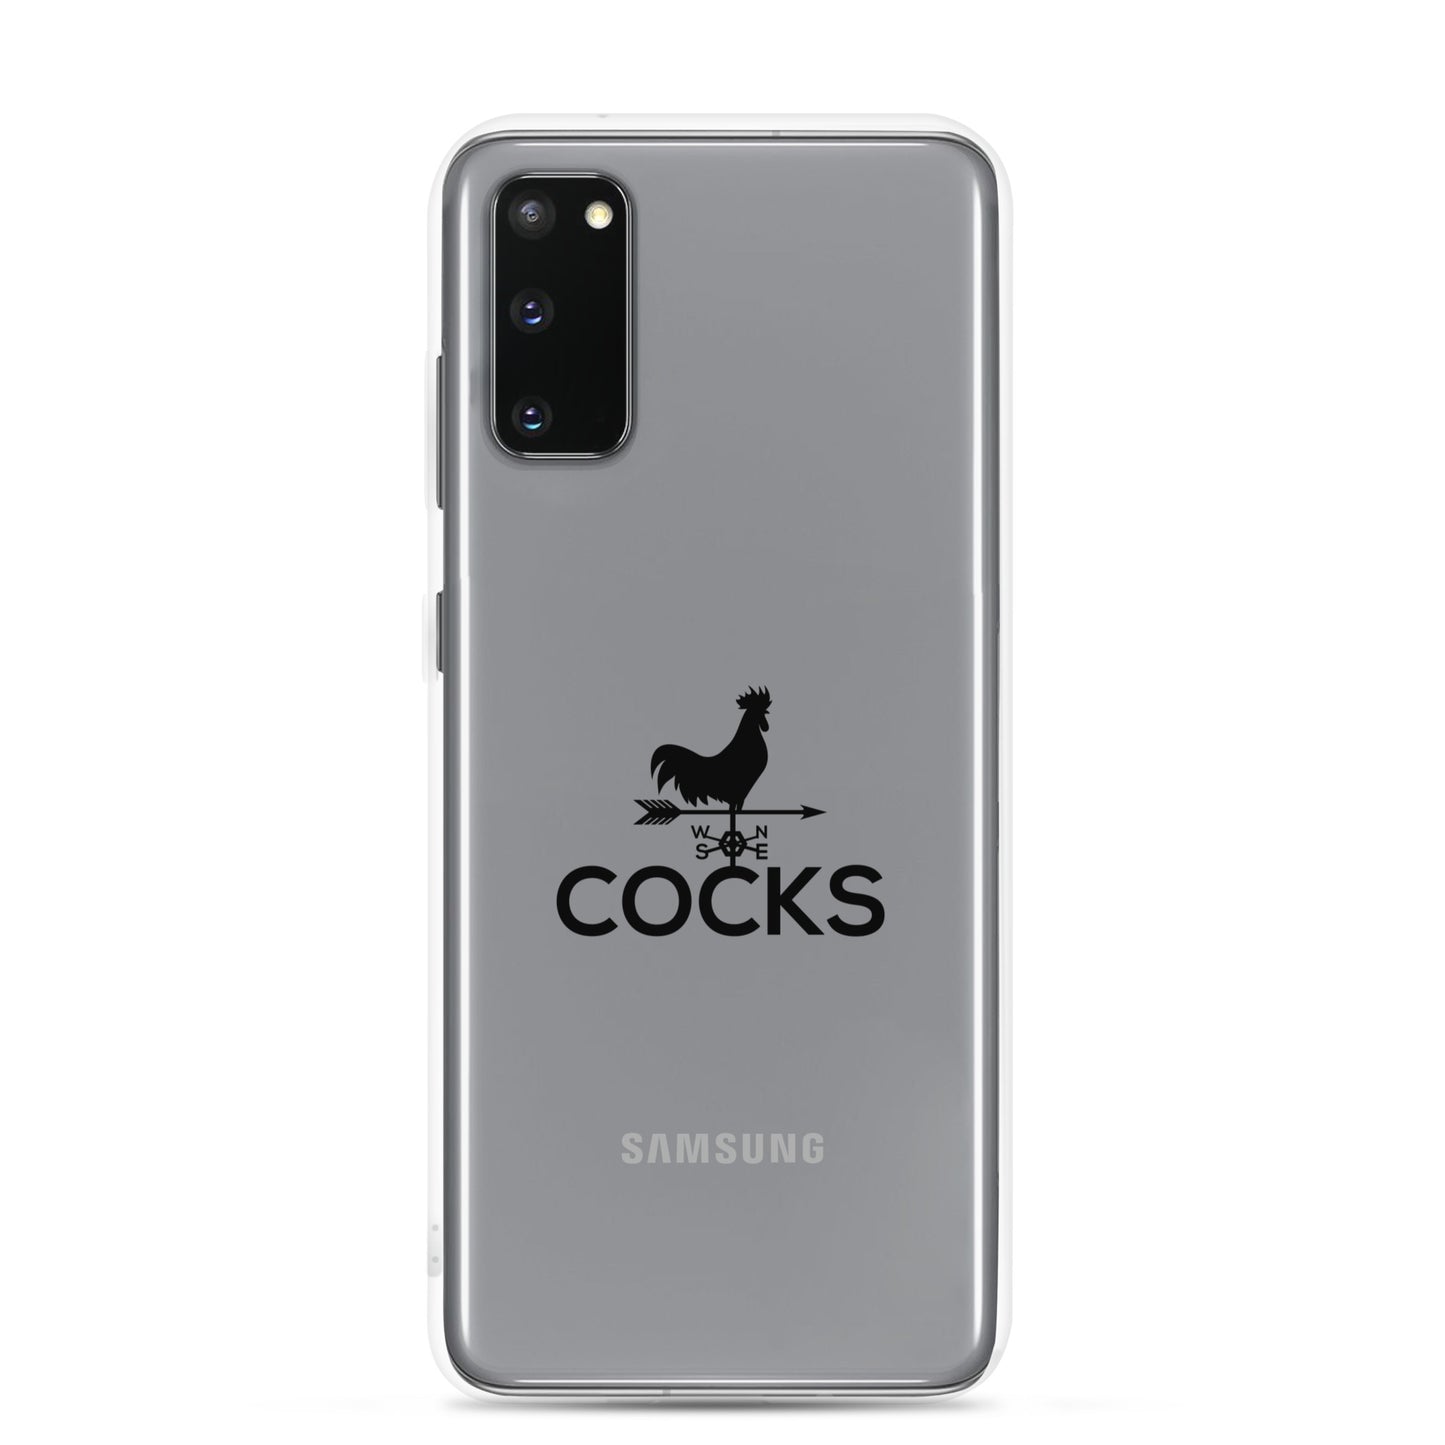 Cocks Clear Case for Samsung®